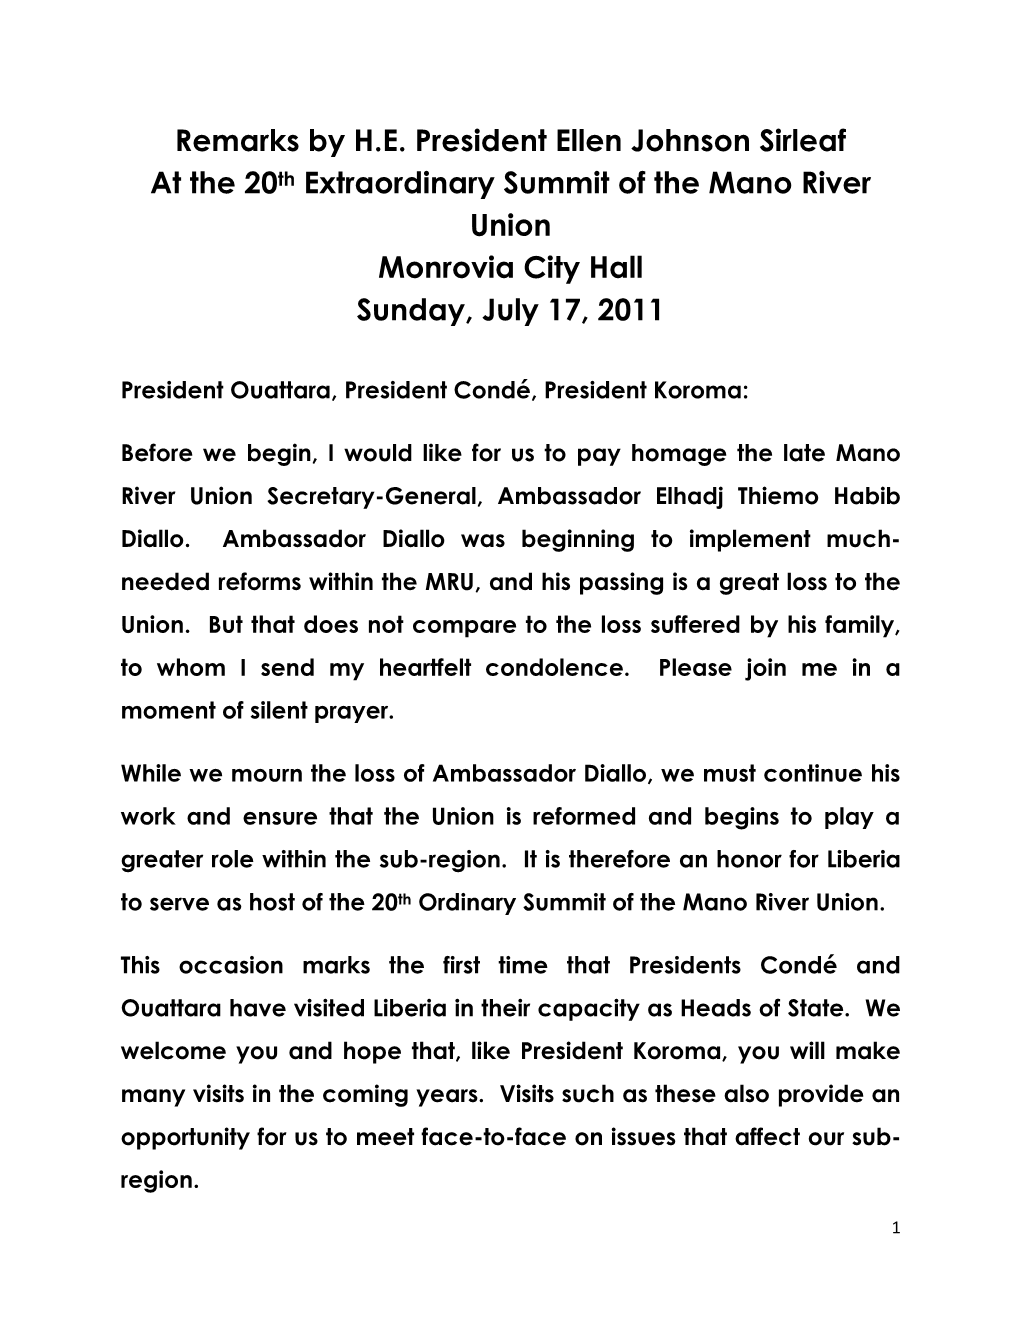 Remarks by H.E. President Ellen Johnson Sirleaf at the 20Th Extraordinary Summit of the Mano River Union Monrovia City Hall Sunday, July 17, 2011